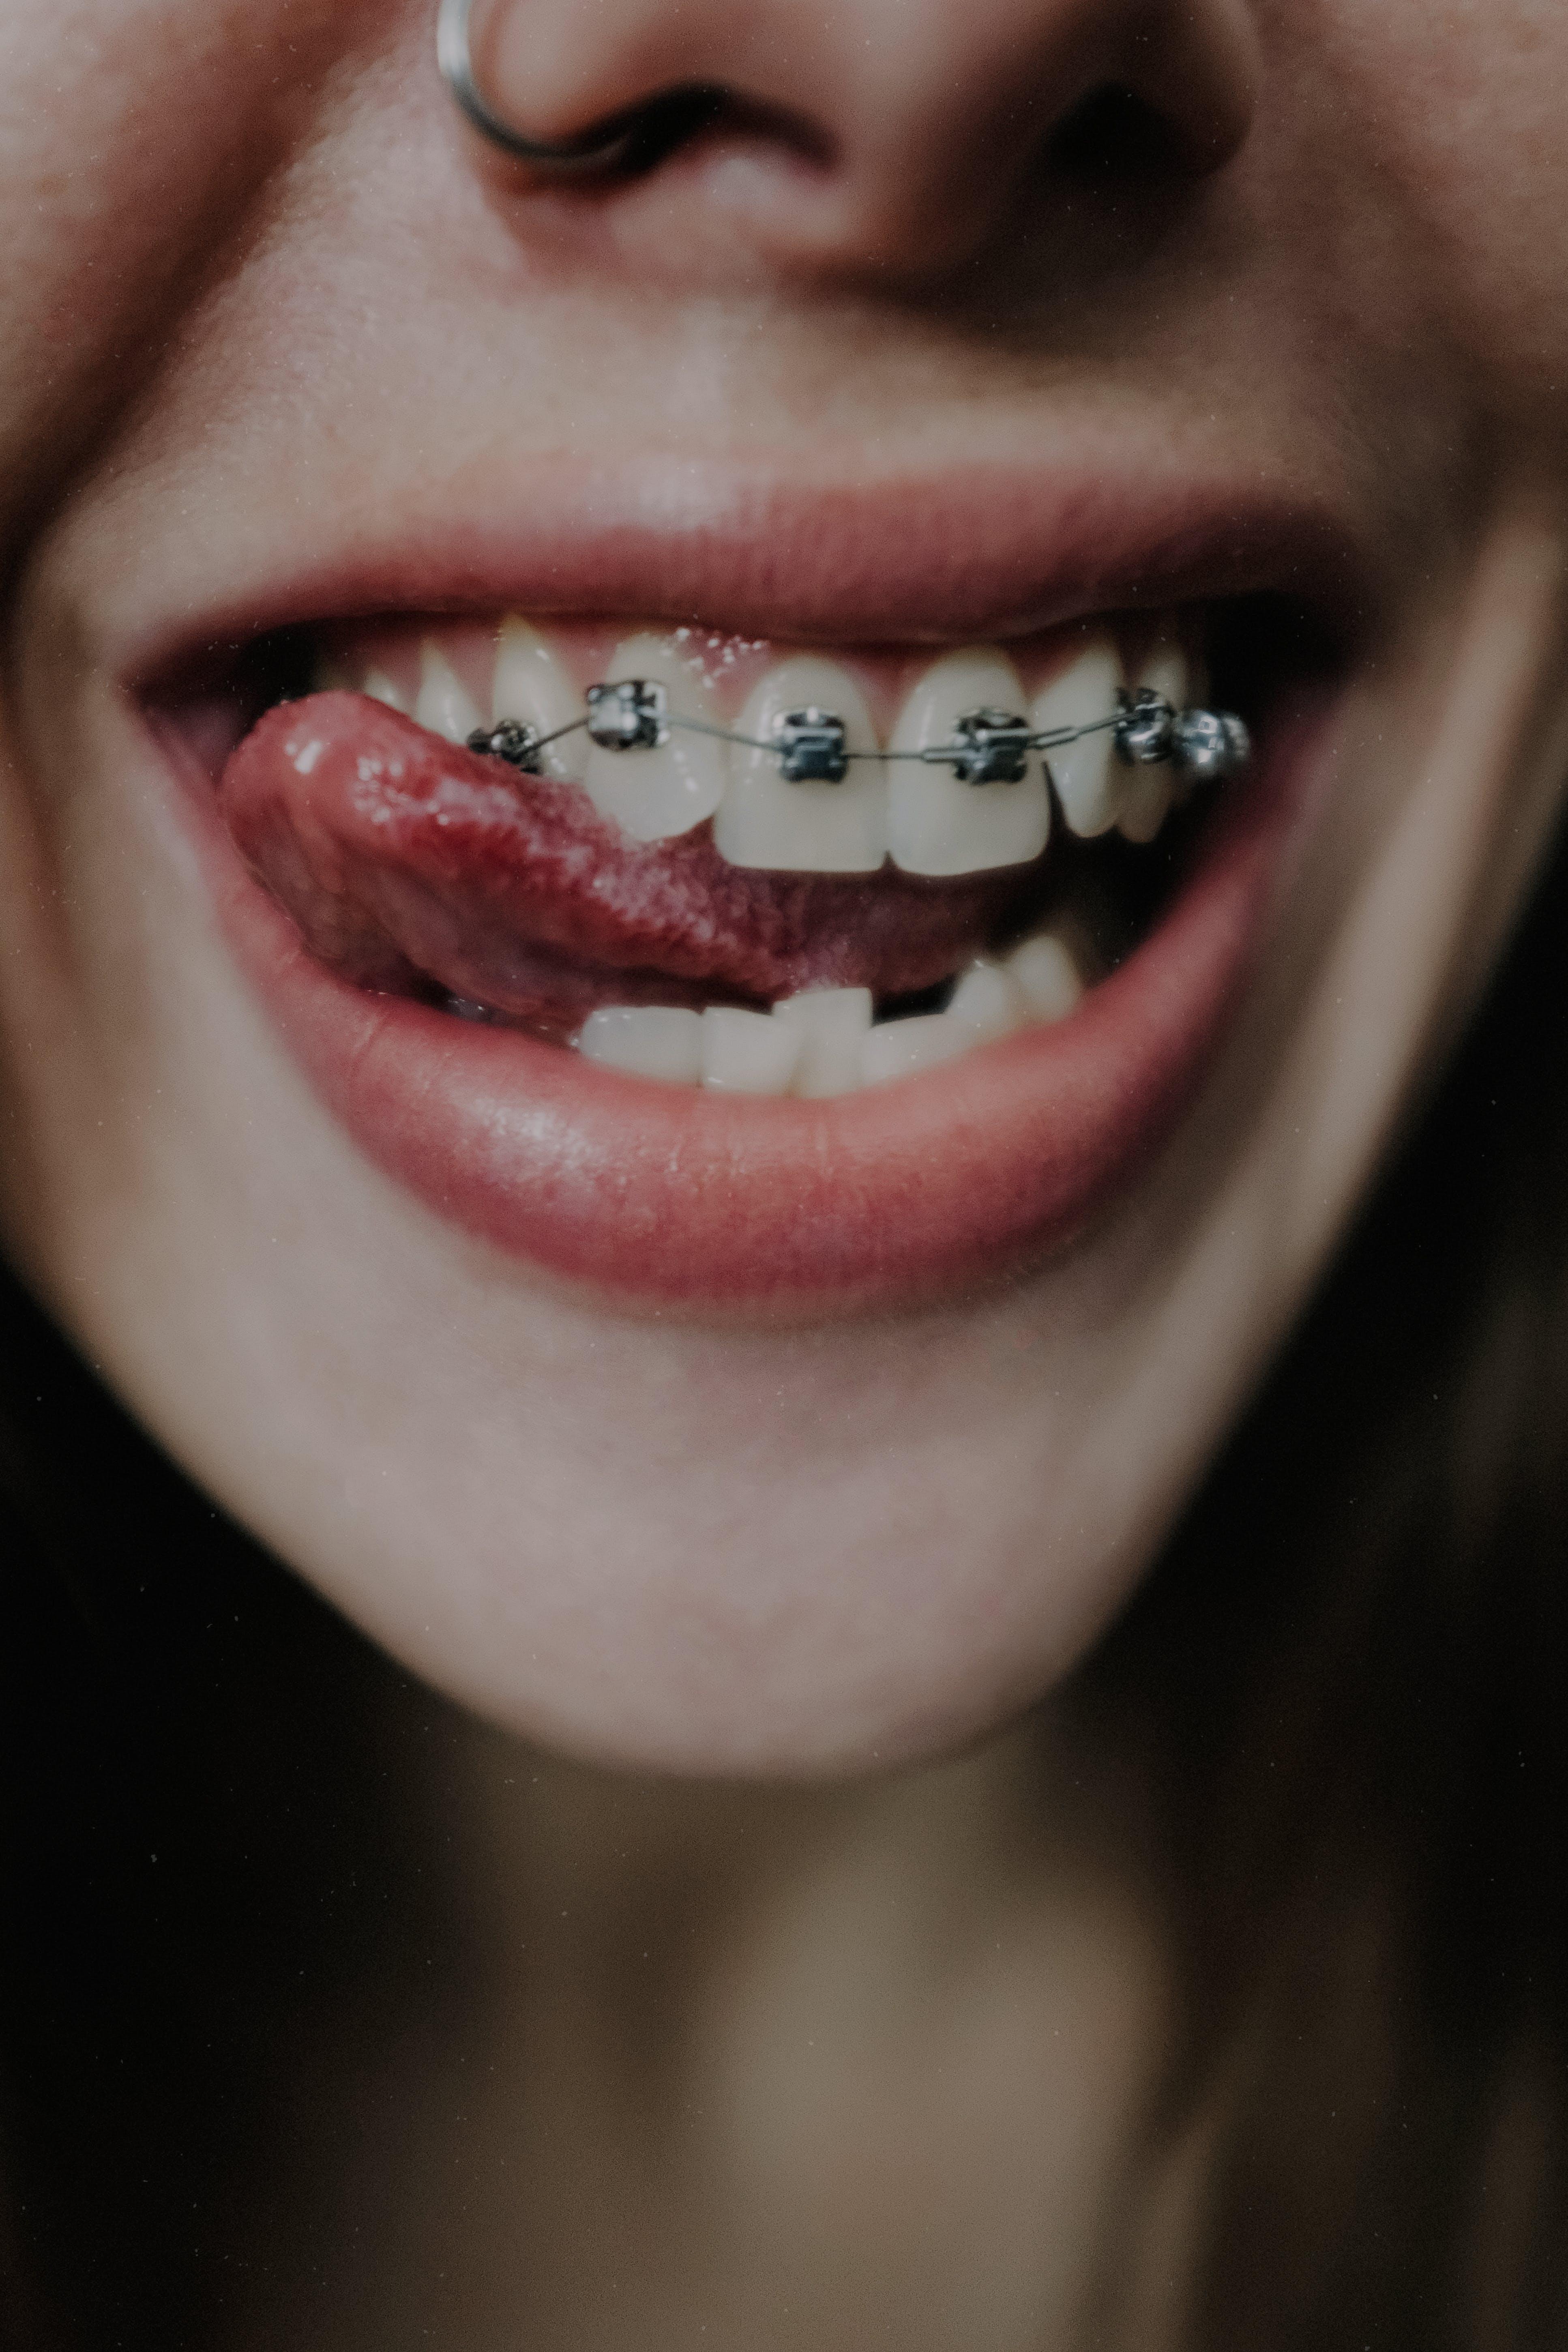 Do braces make you look more attractive? 